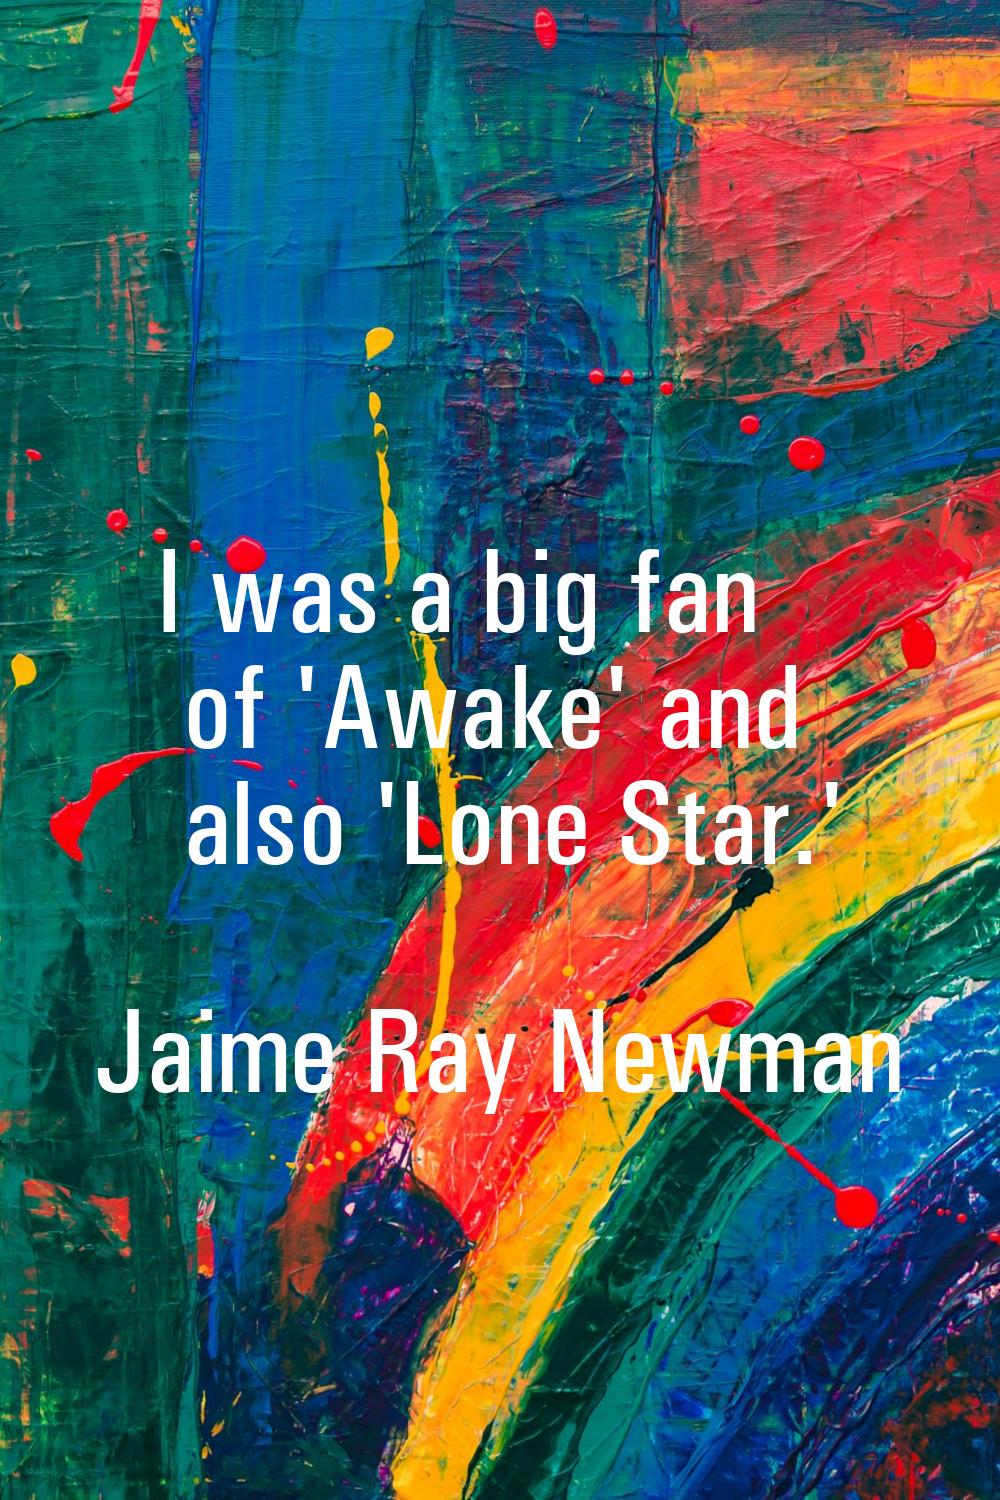 I was a big fan of 'Awake' and also 'Lone Star.'